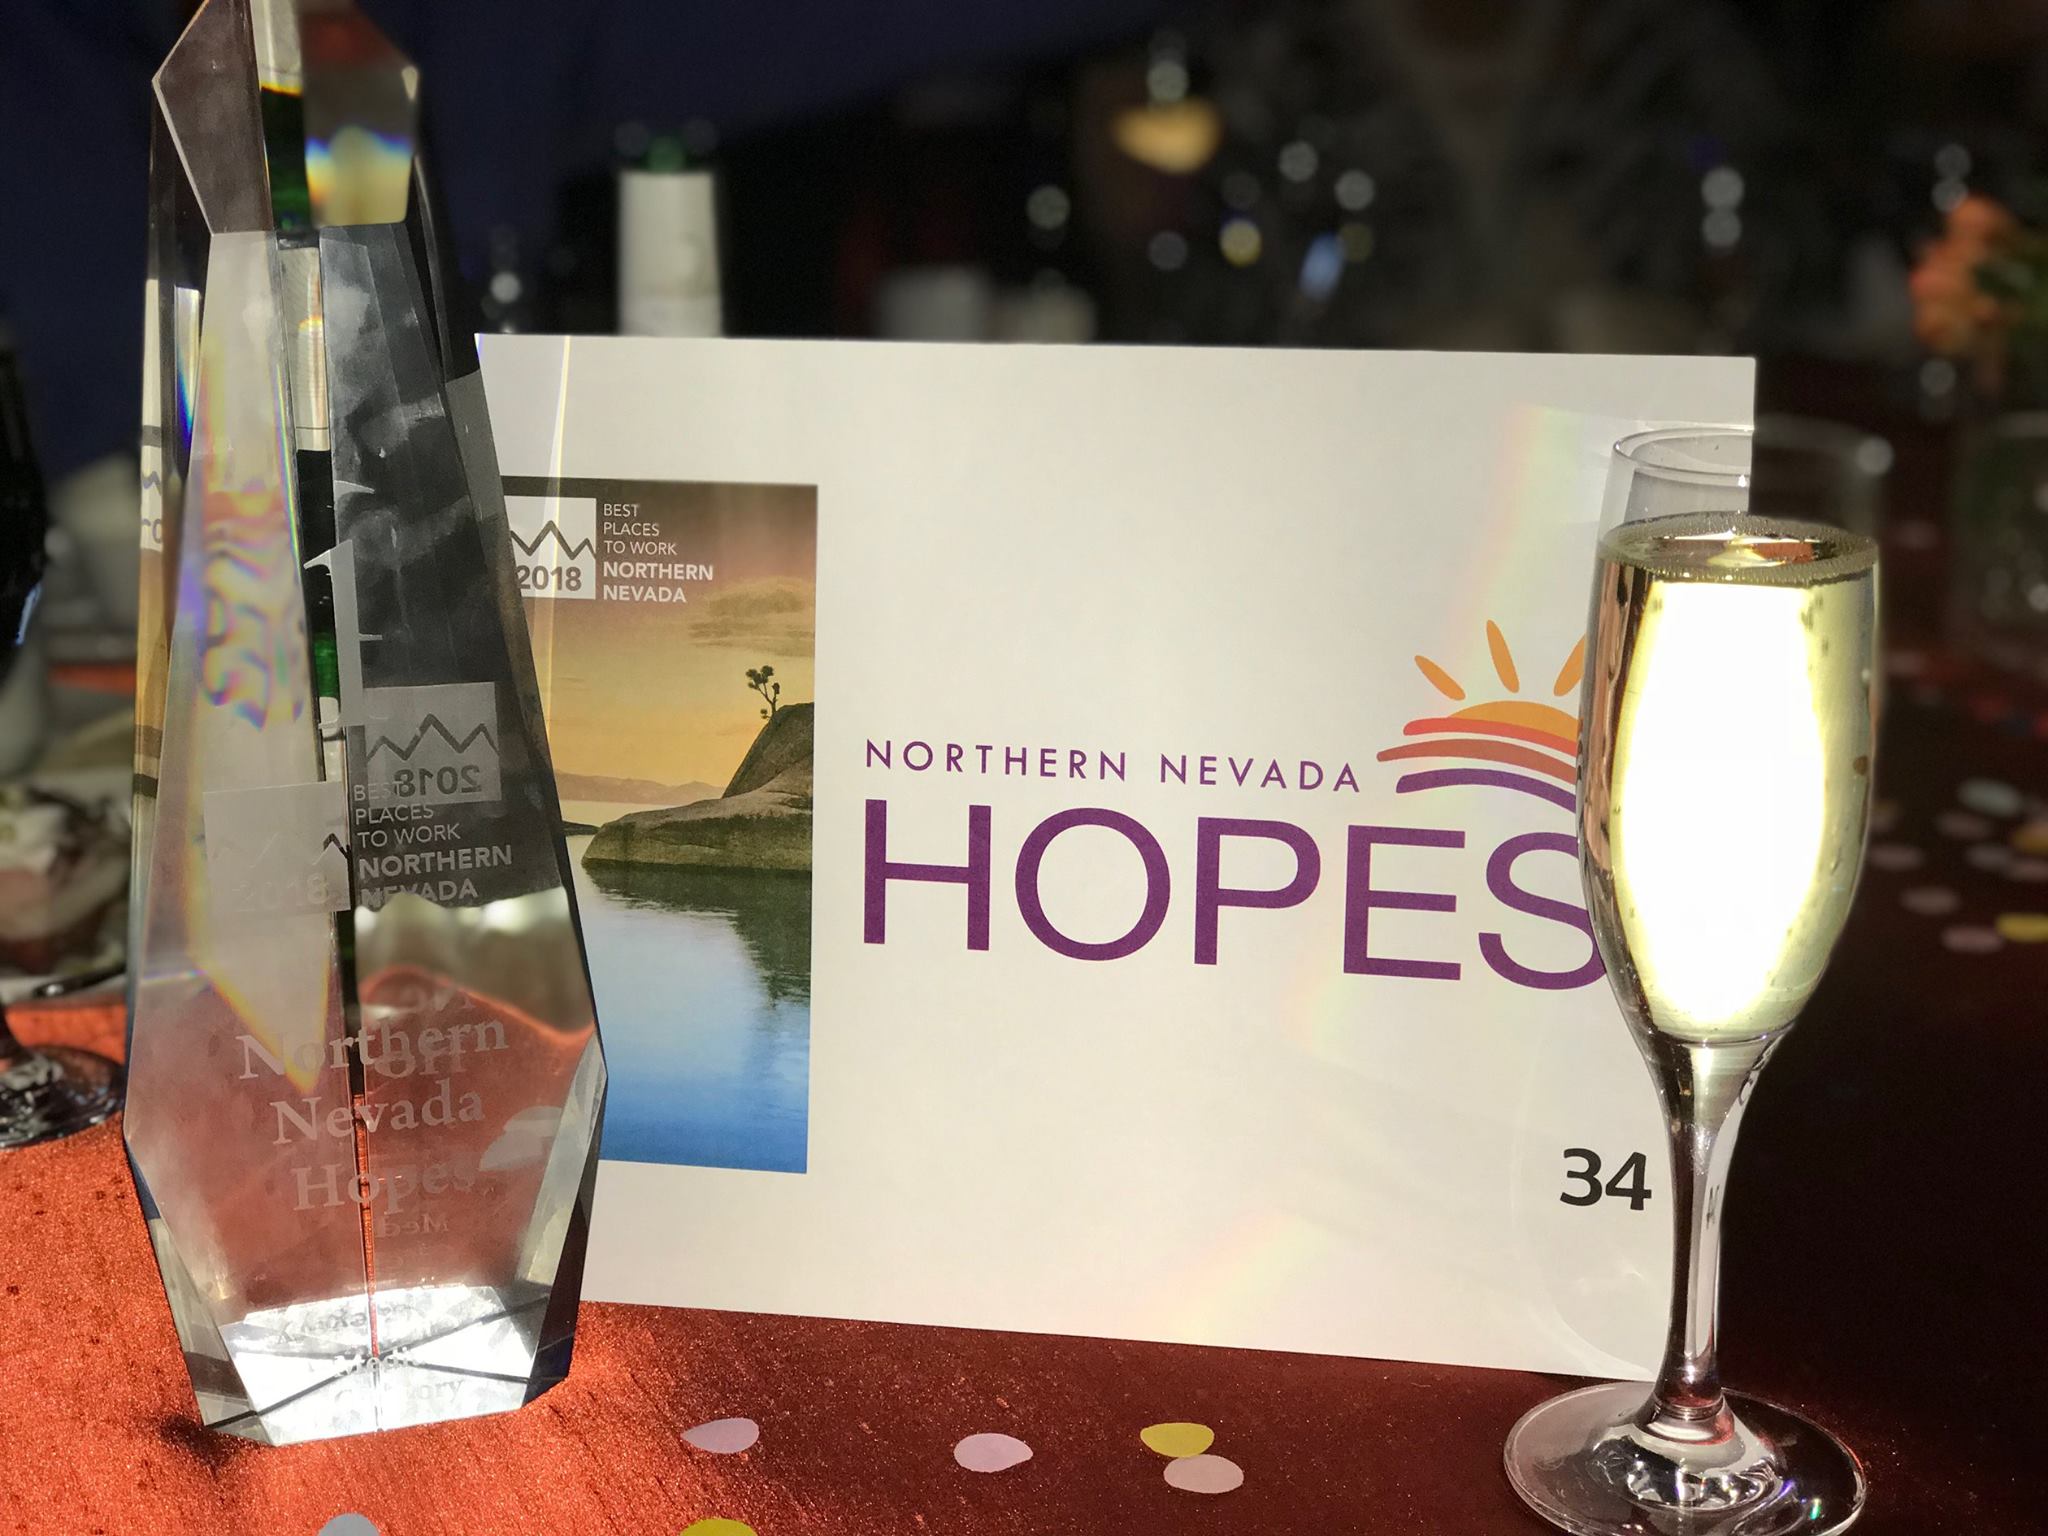 HOPES Wins Best Places To Work 2018